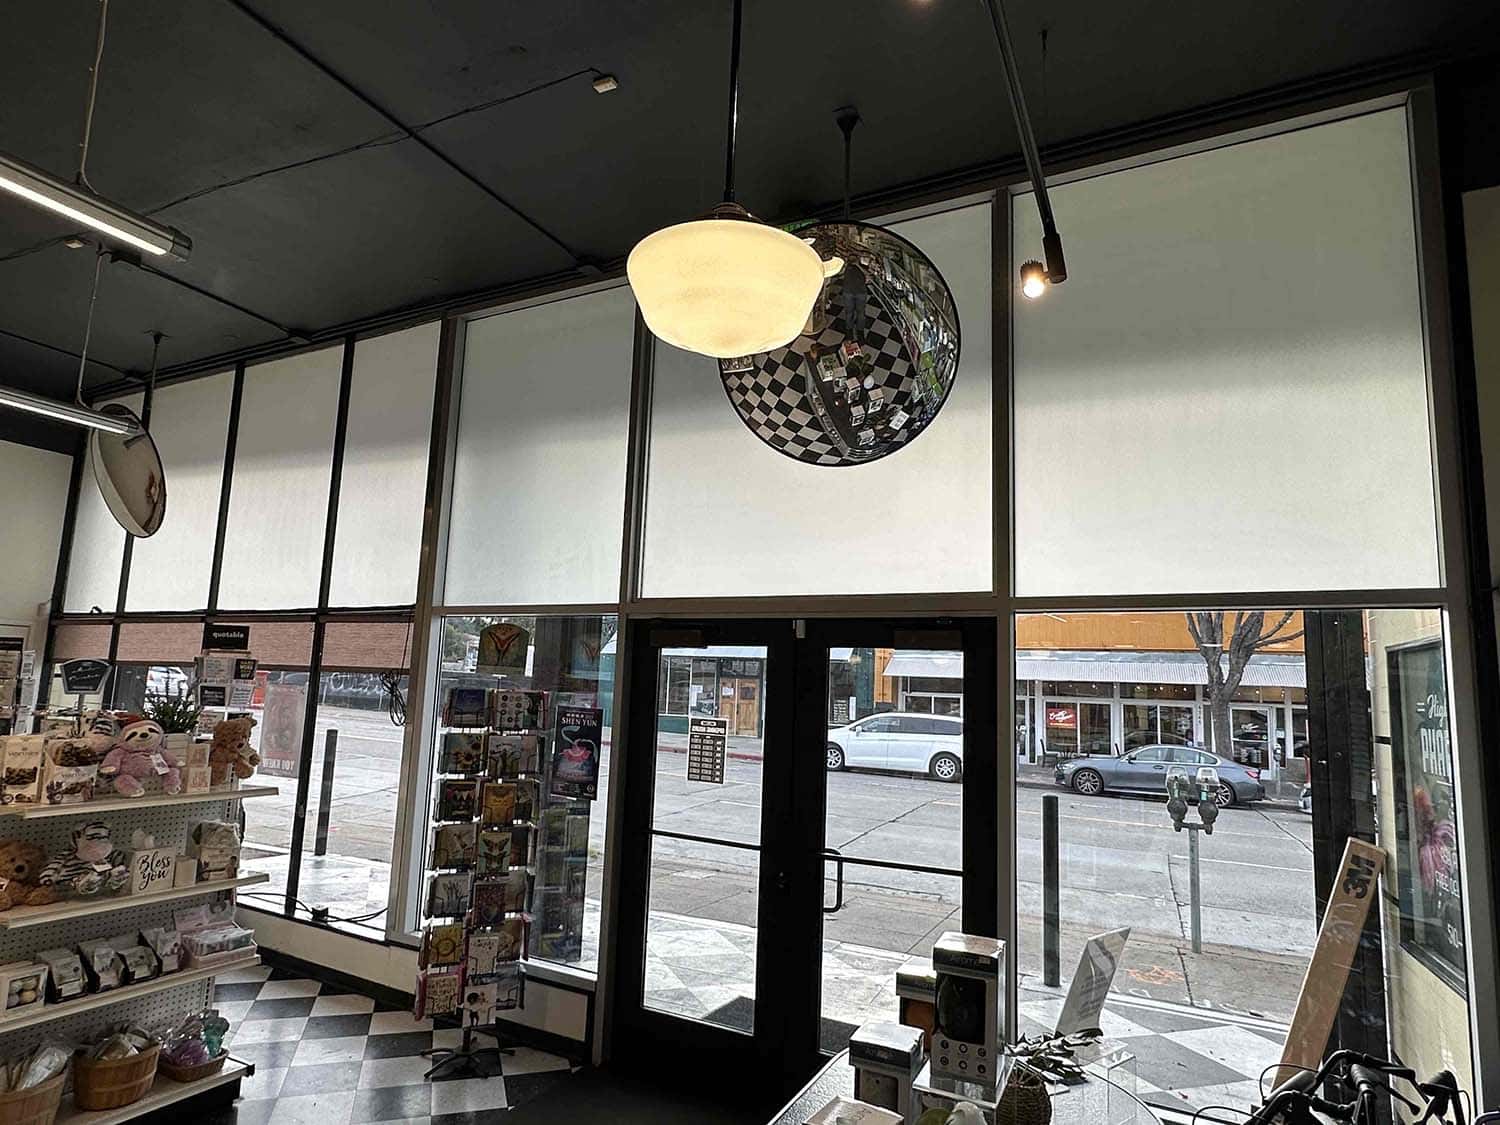 Frosted Window Film Transforms an Oakland, CA Shop, installed by ClimatePro.